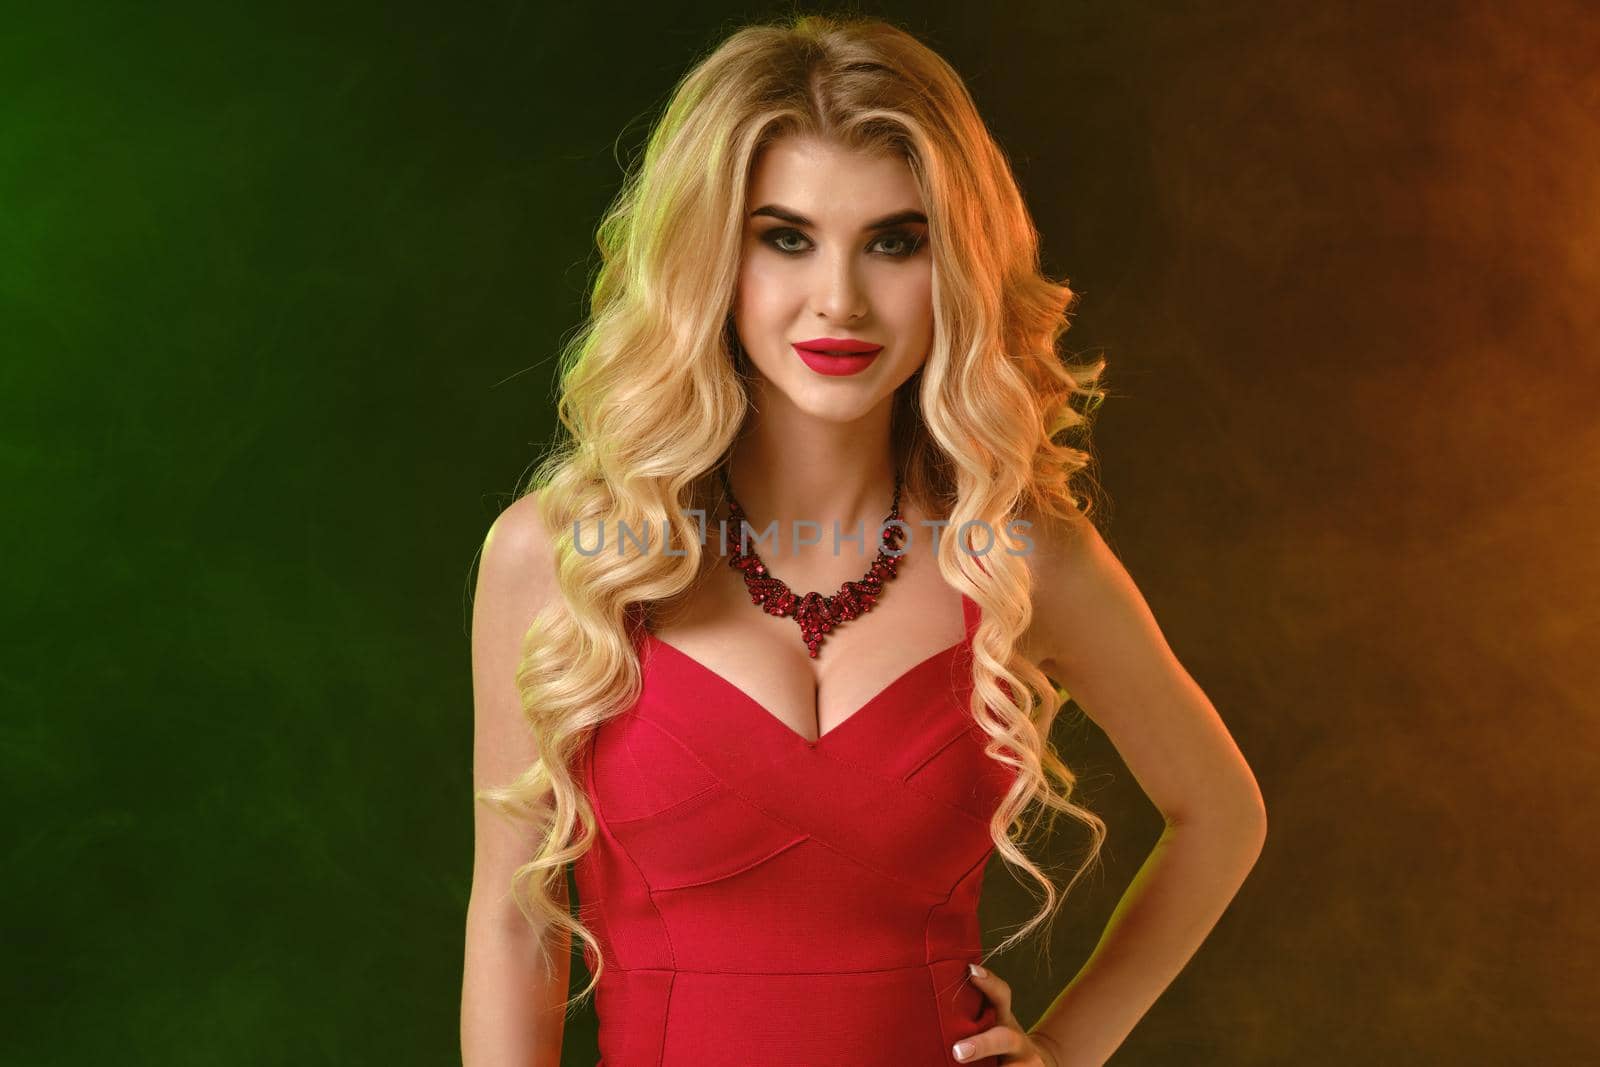 Charming curly blonde girl with bright make-up, in red fitting dress and necklace. She is smiling, hand on waist, posing on colorful smoky studio background. Fashion and beauty. Close up, copy space